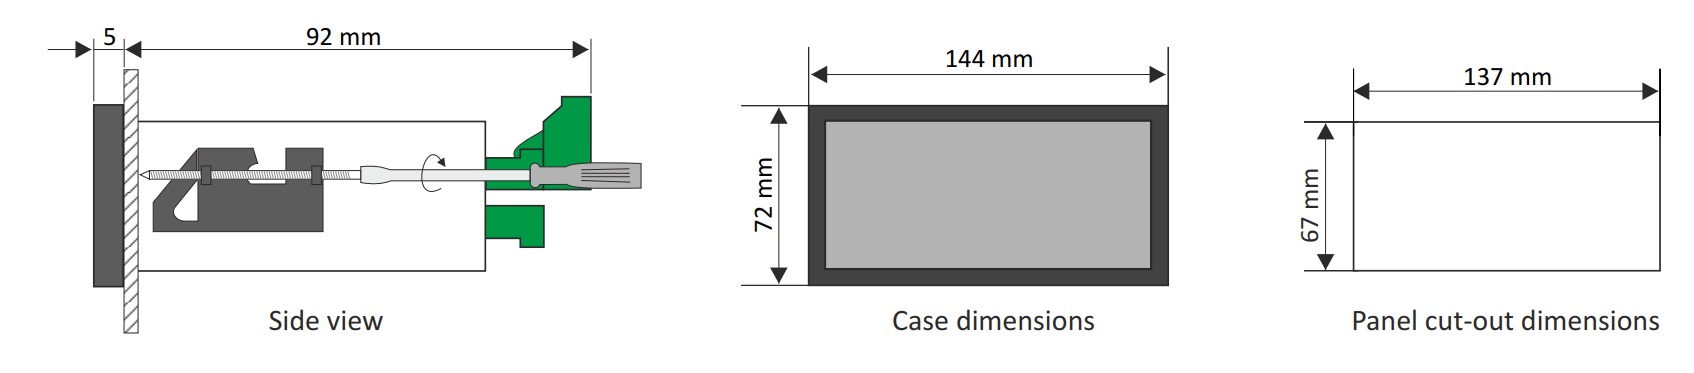 Large Digit Panel Display Dimmensions